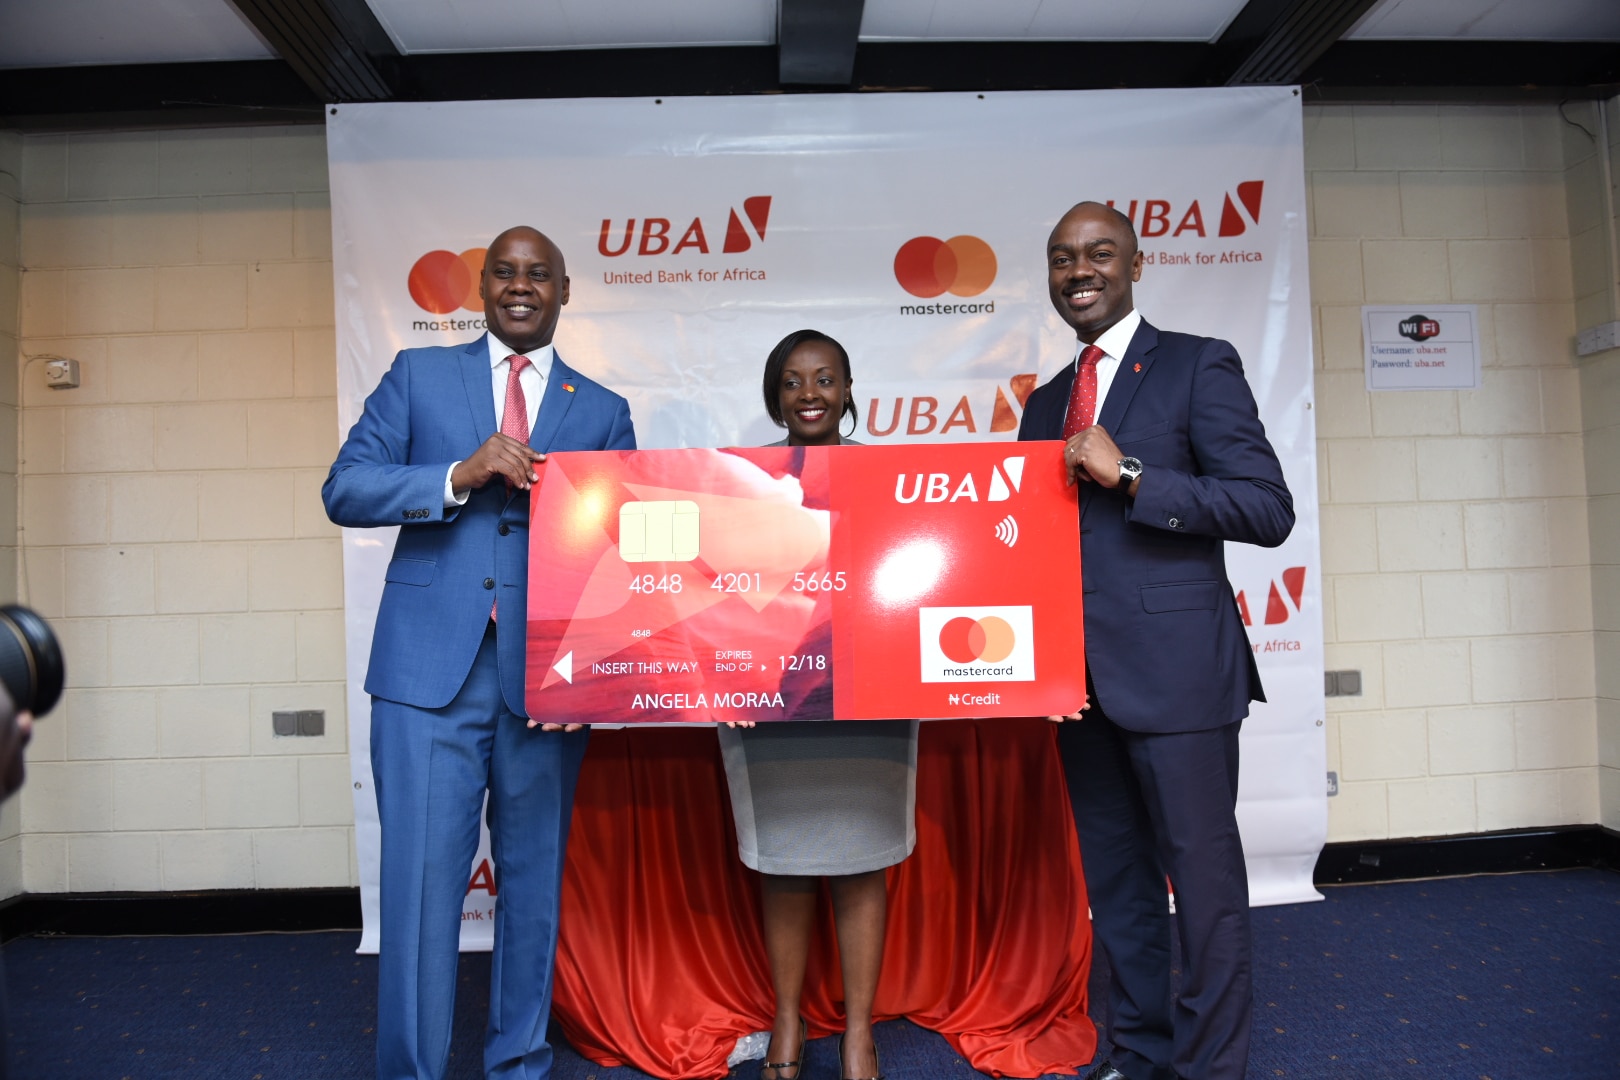 UBA wants Kenya to go cashless with Mastercard Payment Solutions